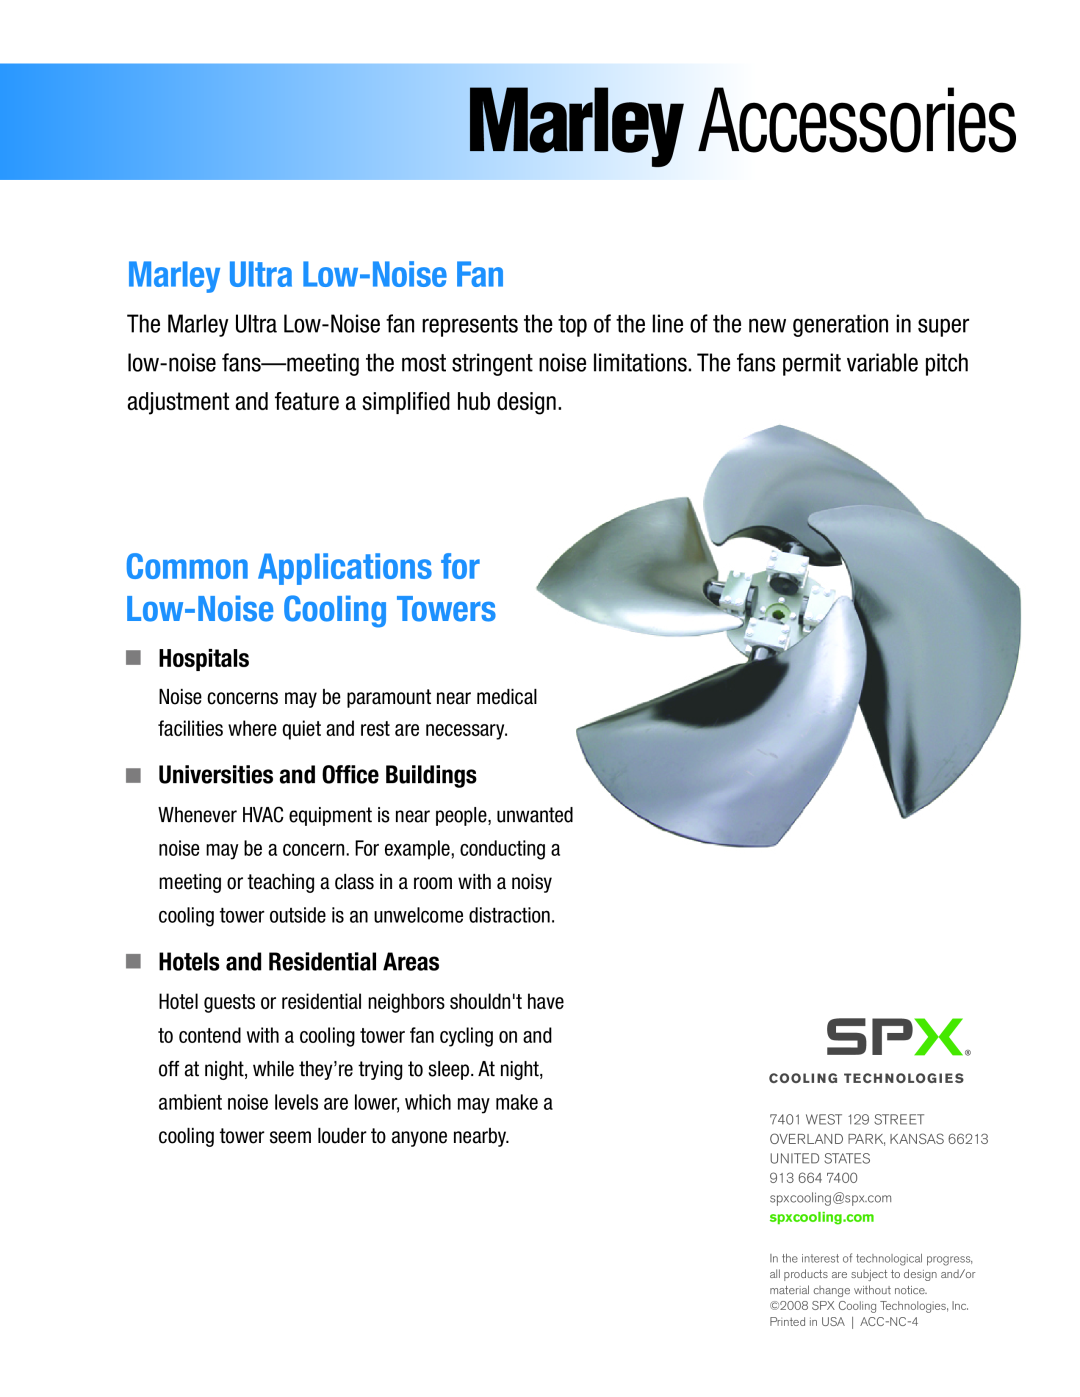 SPX Cooling Technologies ACC-NC-4 manual Arley !Ccessories, Marley Ultra Low-NoiseFan, Hospitals 